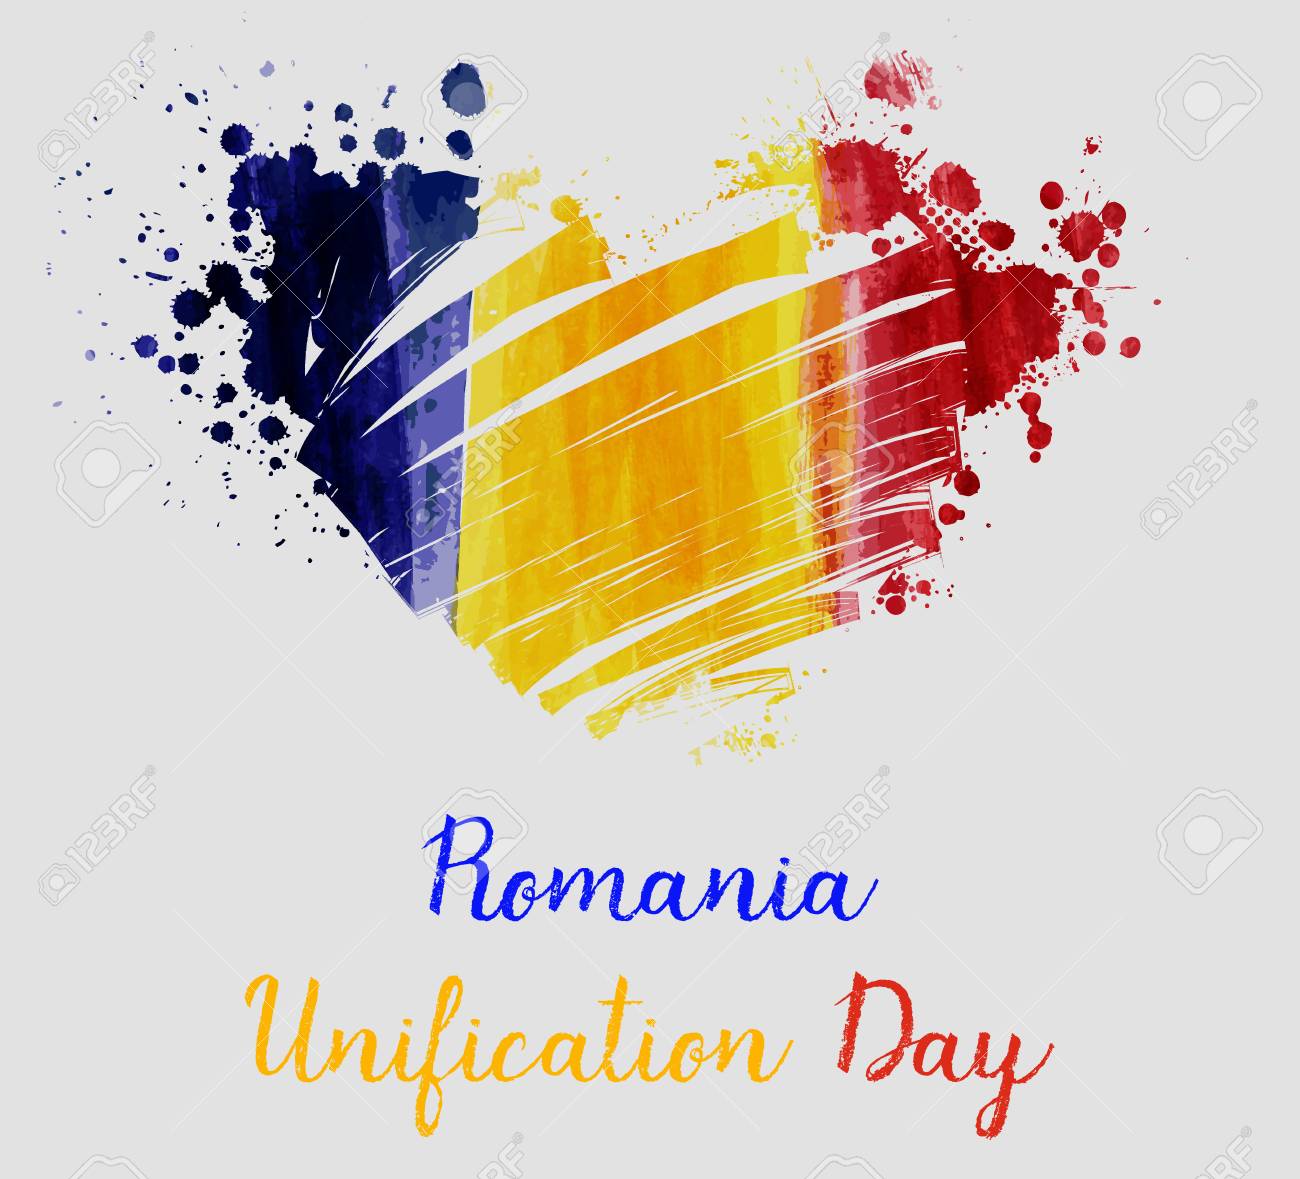 Romania Unification Day Background With Watercolor Grunge Lines